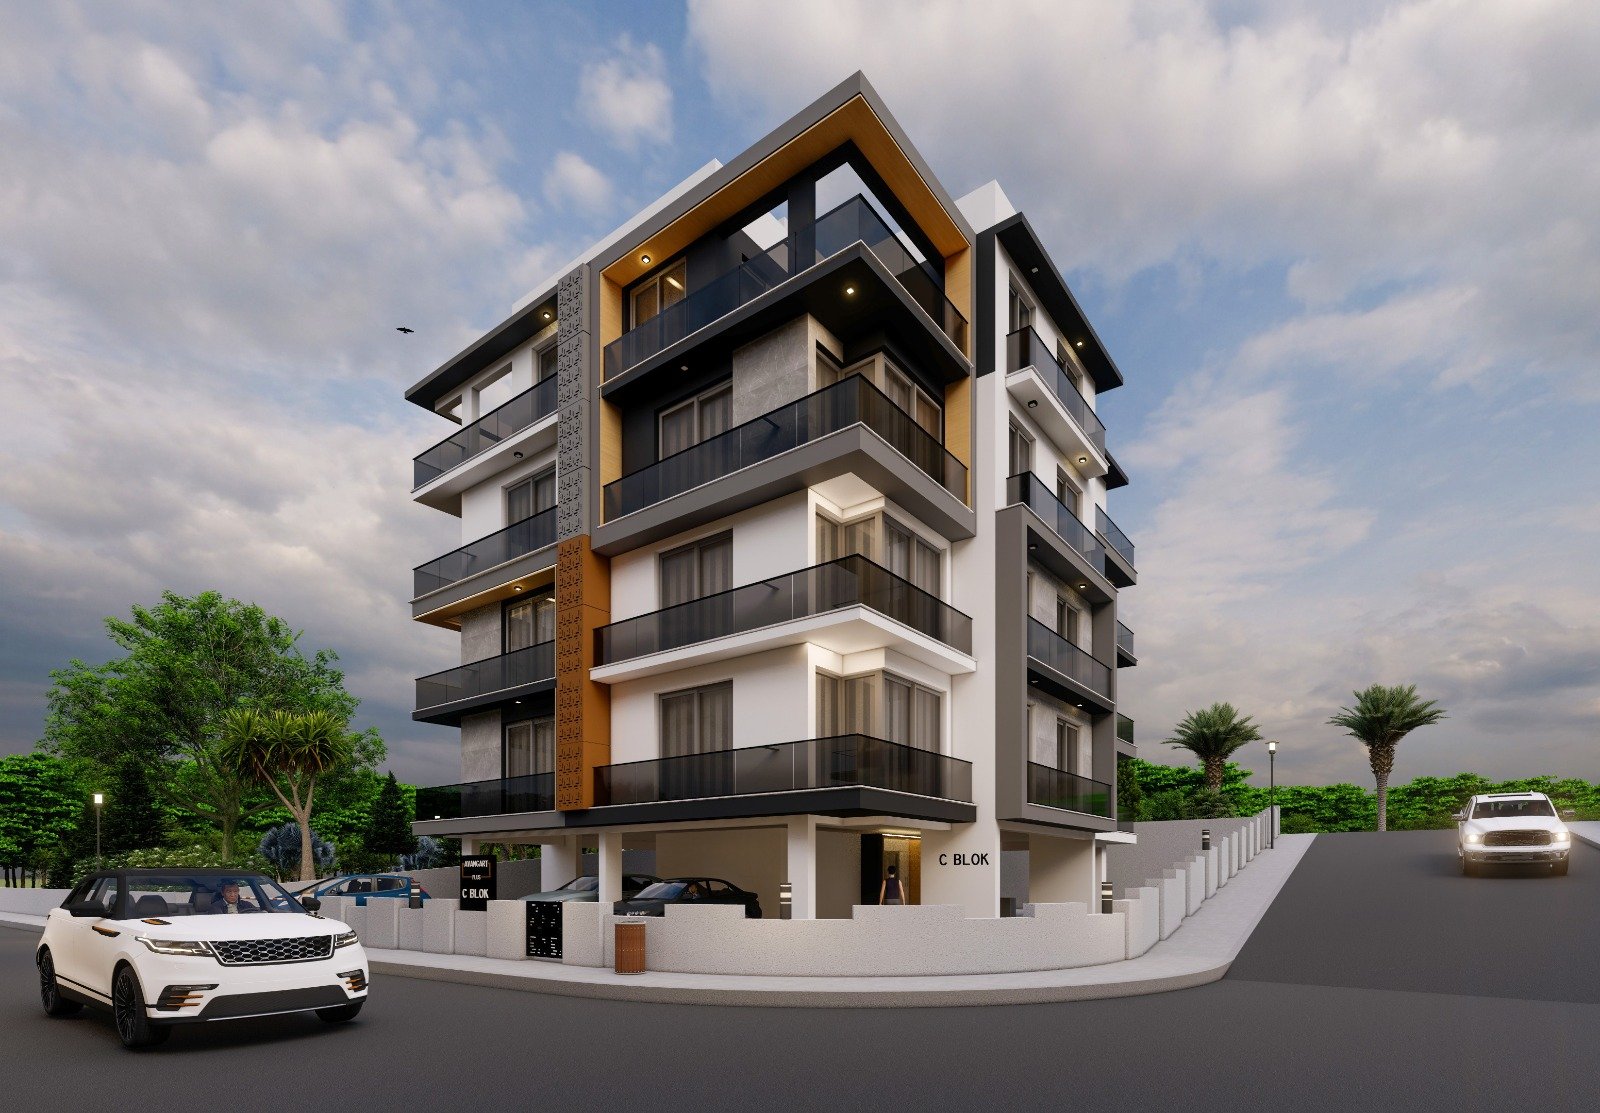 FOR SALE IN KYRENIA   OFFICES,  APARTMENTS 2+1 / 3+1  -1a9d2088-ced3-4660-88af-d8eb84ee36a3